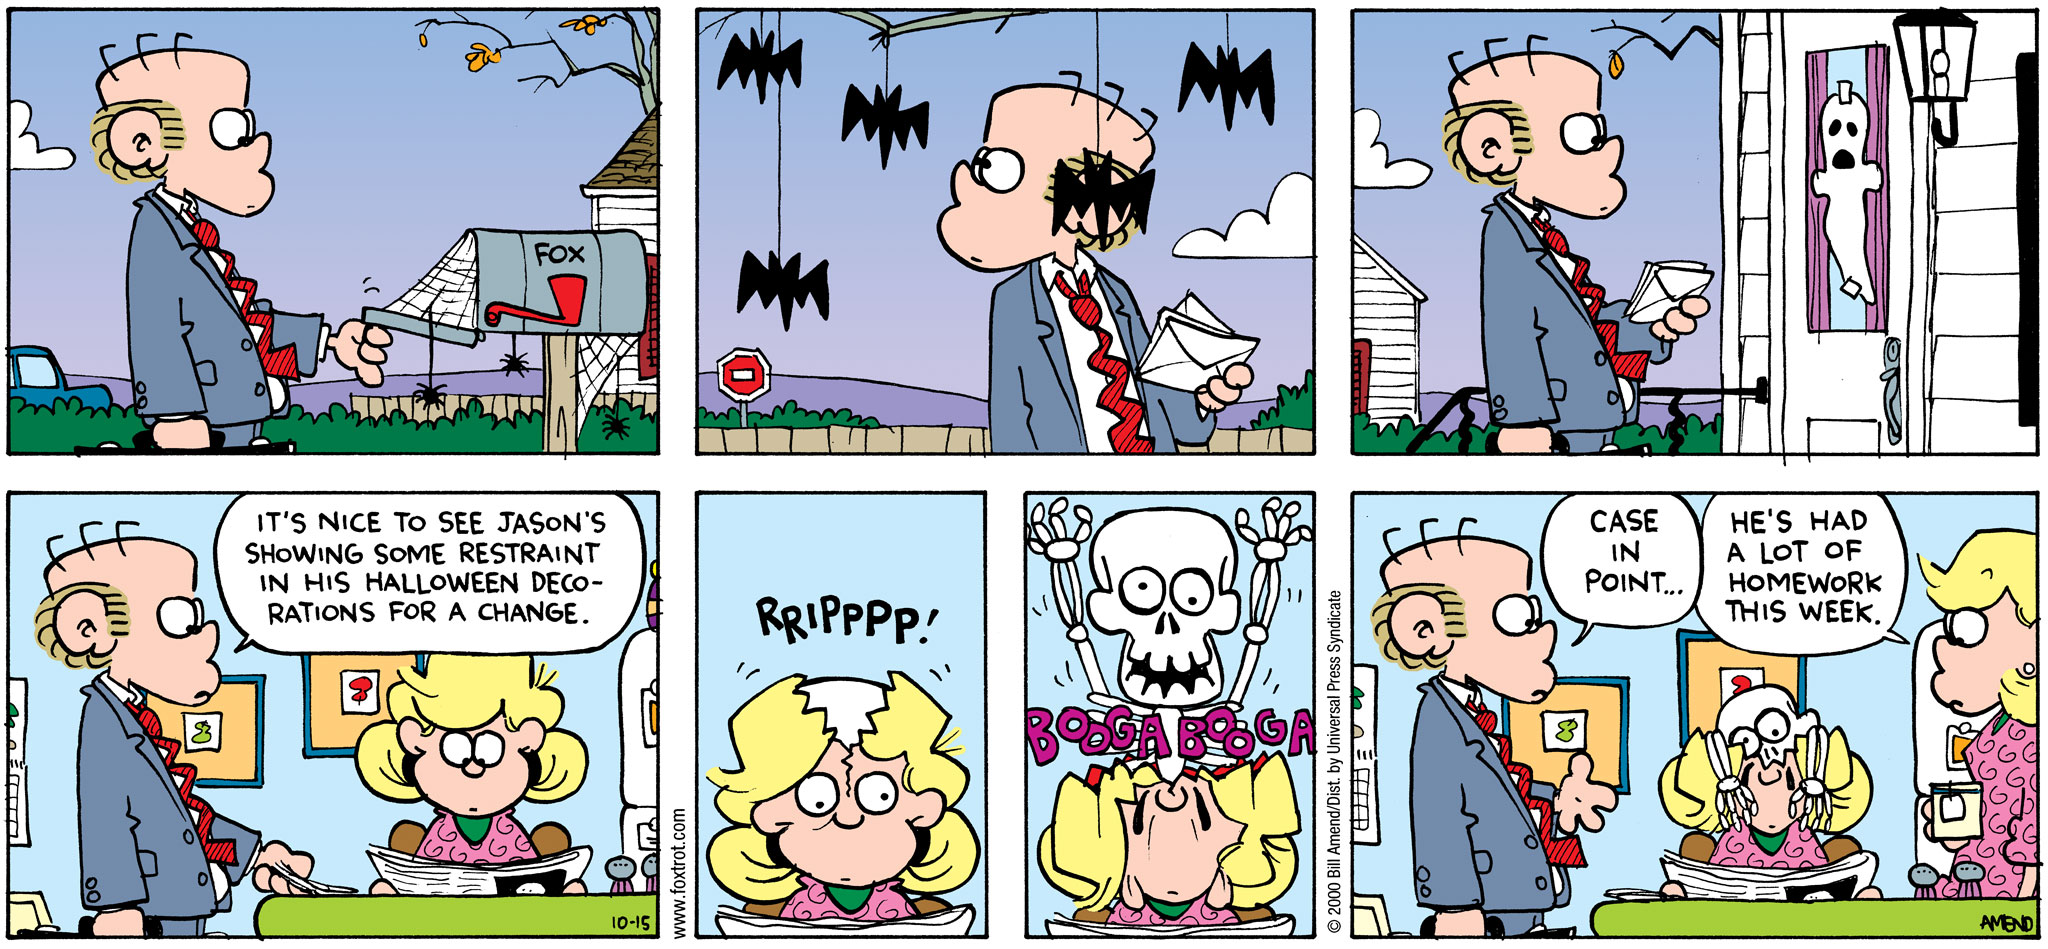 Halloween Comics - FoxTrot comic strip by Bill Amend - Published October 15, 2000 - Roger Fox: It's nice to see Jason's showing some restraint in his Halloween decorations for a change. Case in point... Andy Fox: He's had a lot of homework this week.